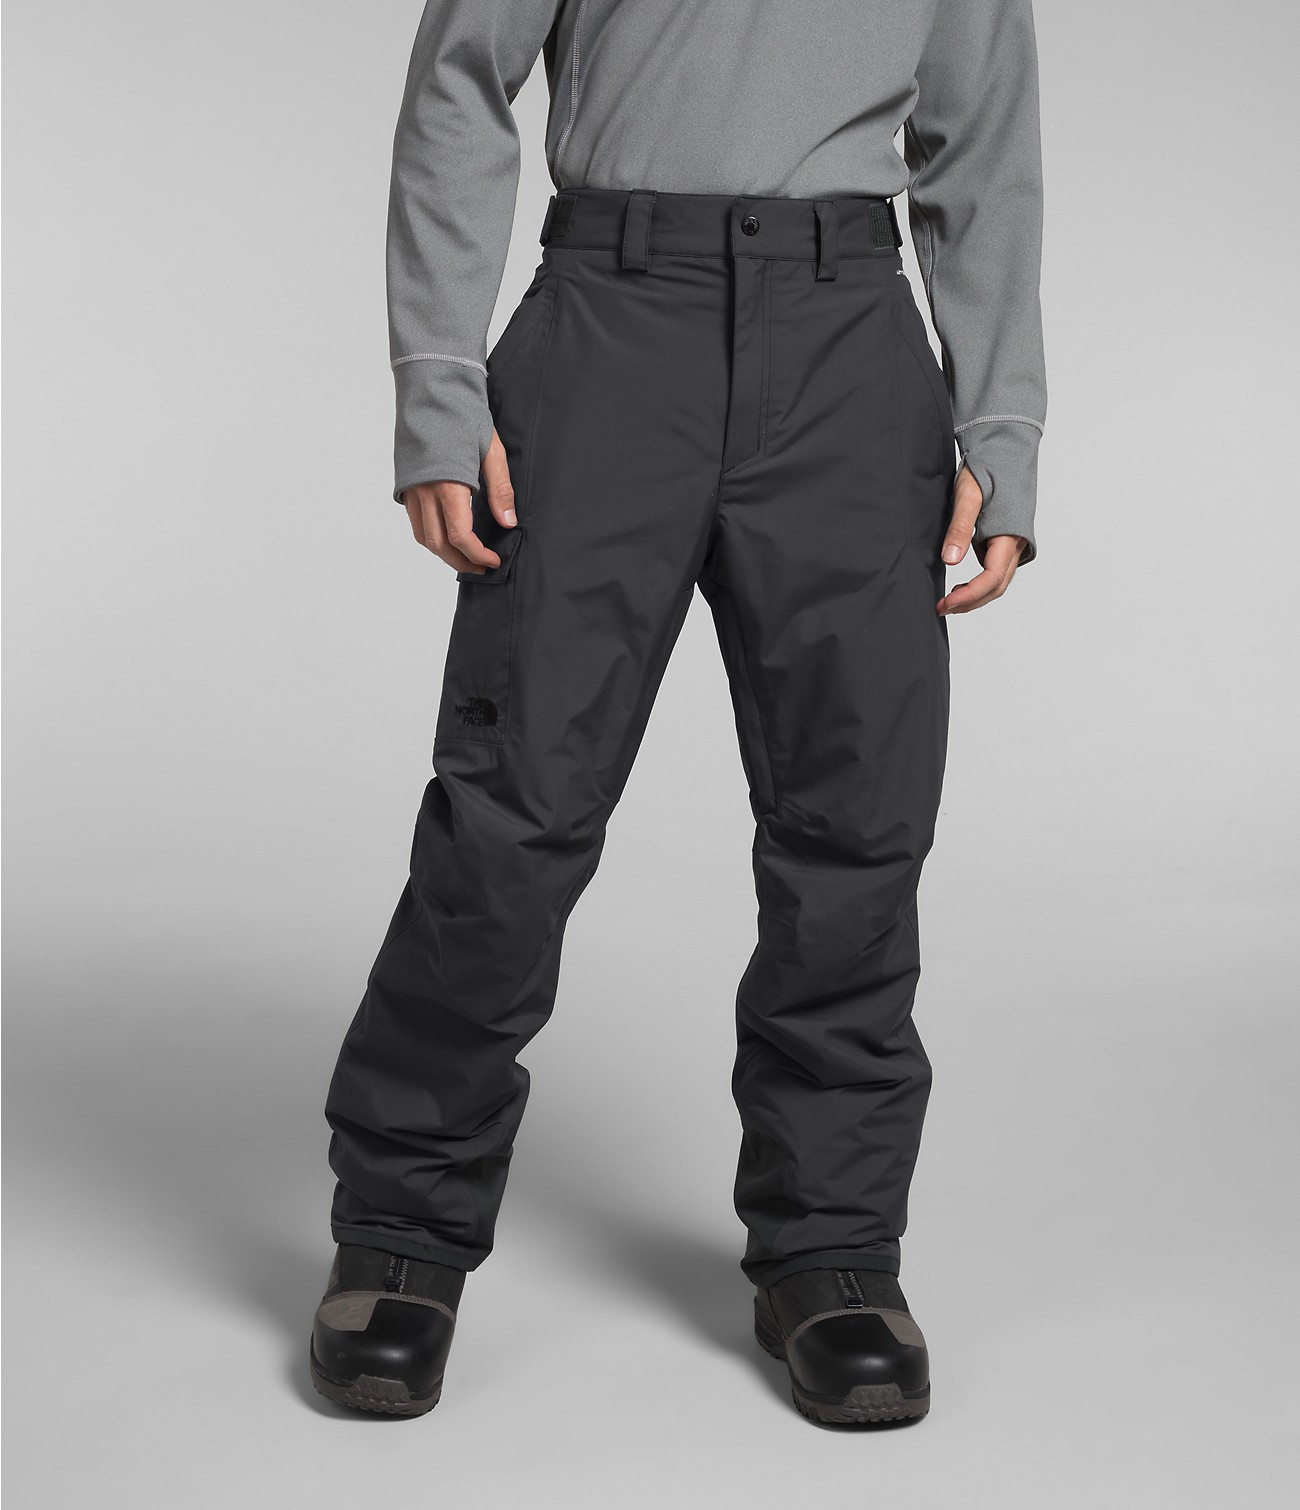 Unlock Wilderness' choice in the Obermeyer Vs North Face comparison, the Freedom Insulated Pants by The North Face